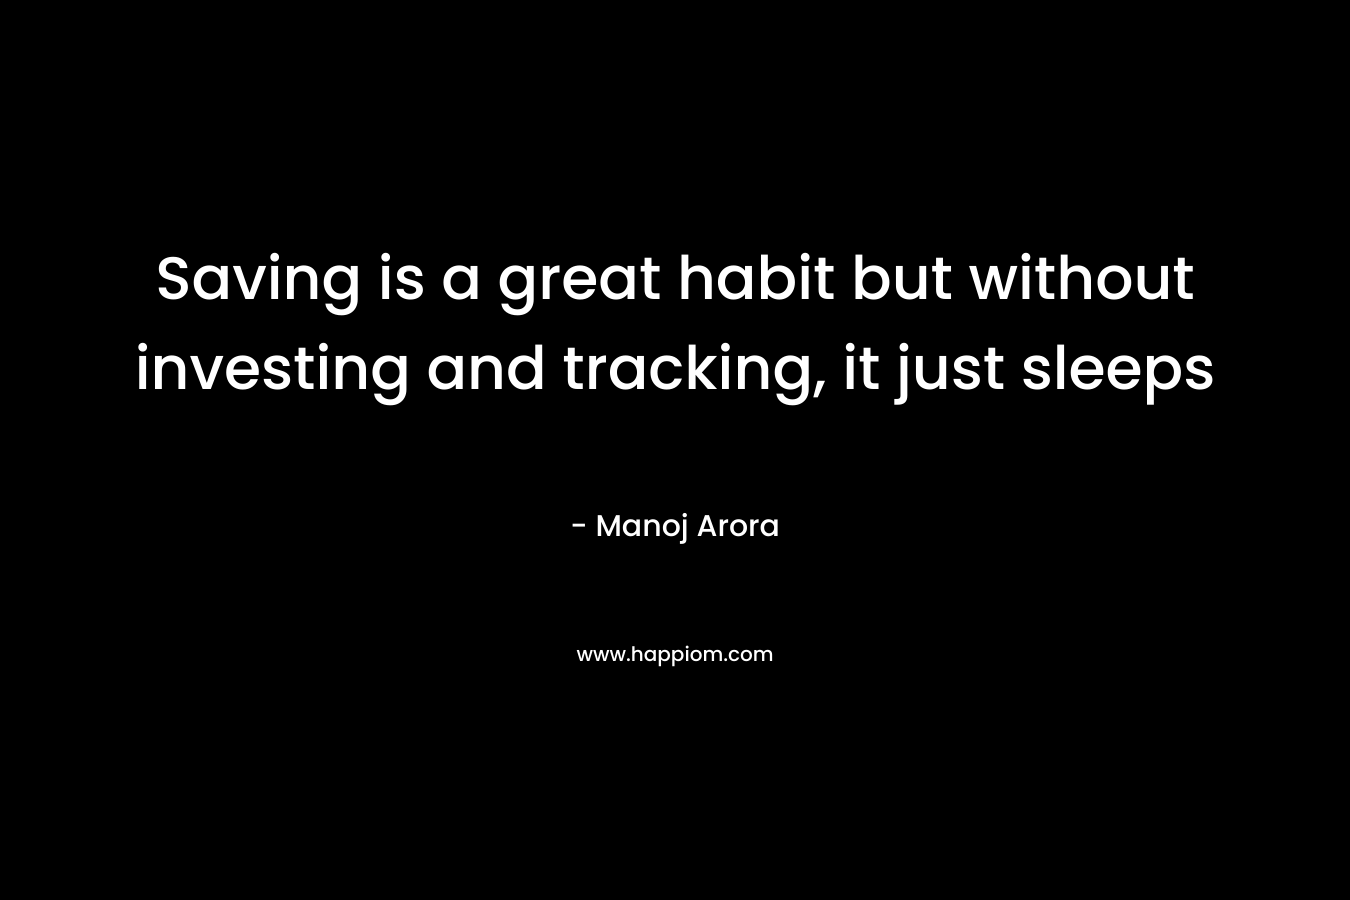 Saving is a great habit but without investing and tracking, it just sleeps